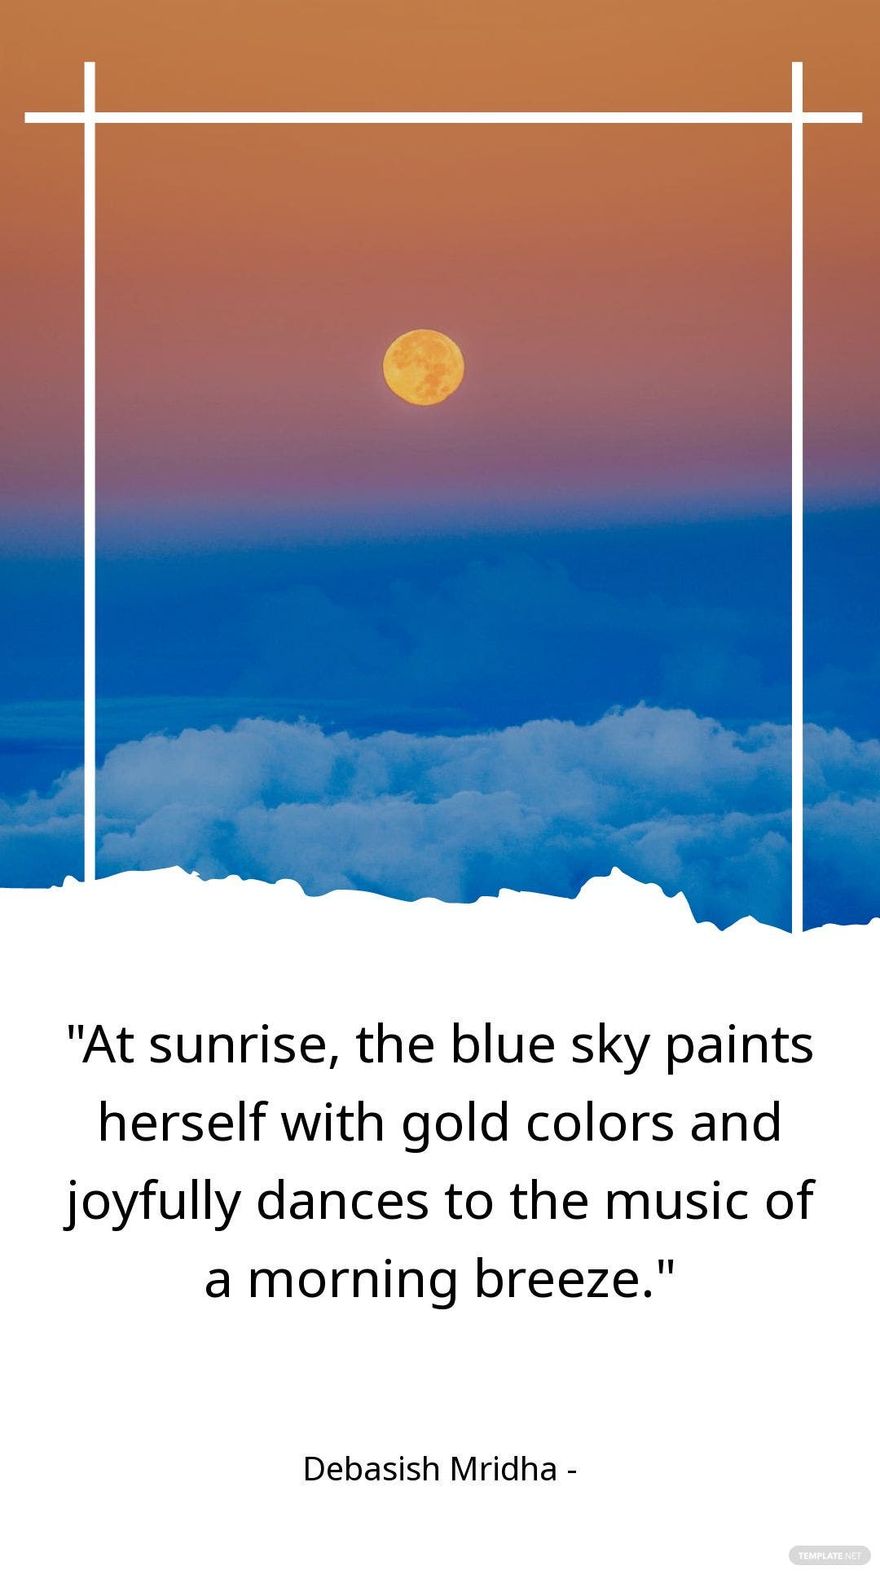 Debasish Mridha - At sunrise, the blue sky paints herself with gold colors and joyfully dances to the music of a morning breeze.